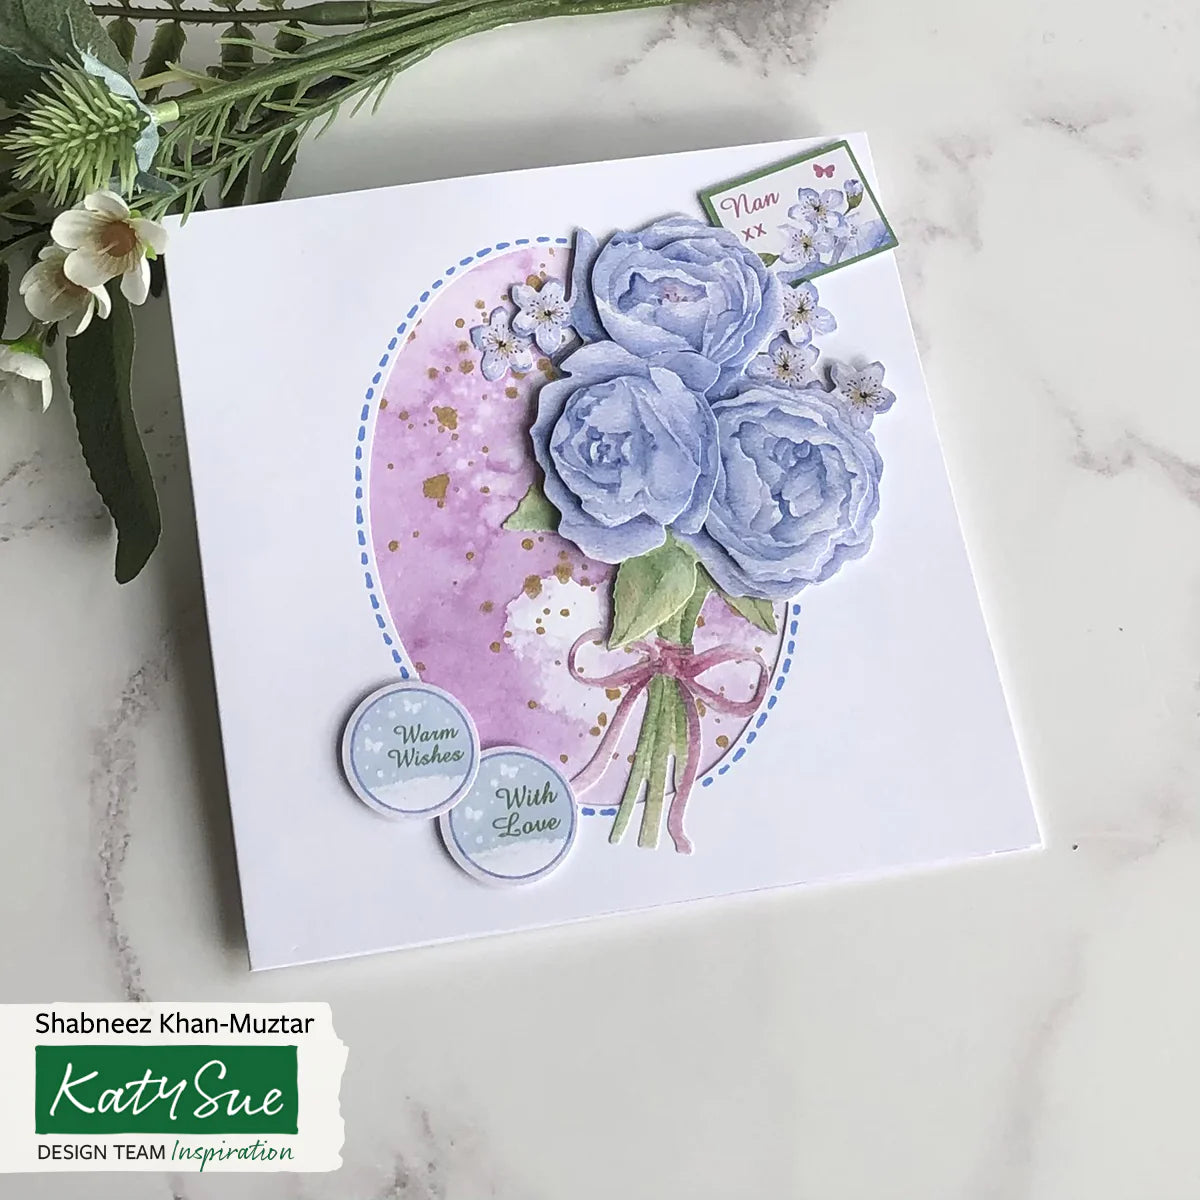 Die Cut Decoupage – Blue Roses And Cupcake (Pack Of 3)